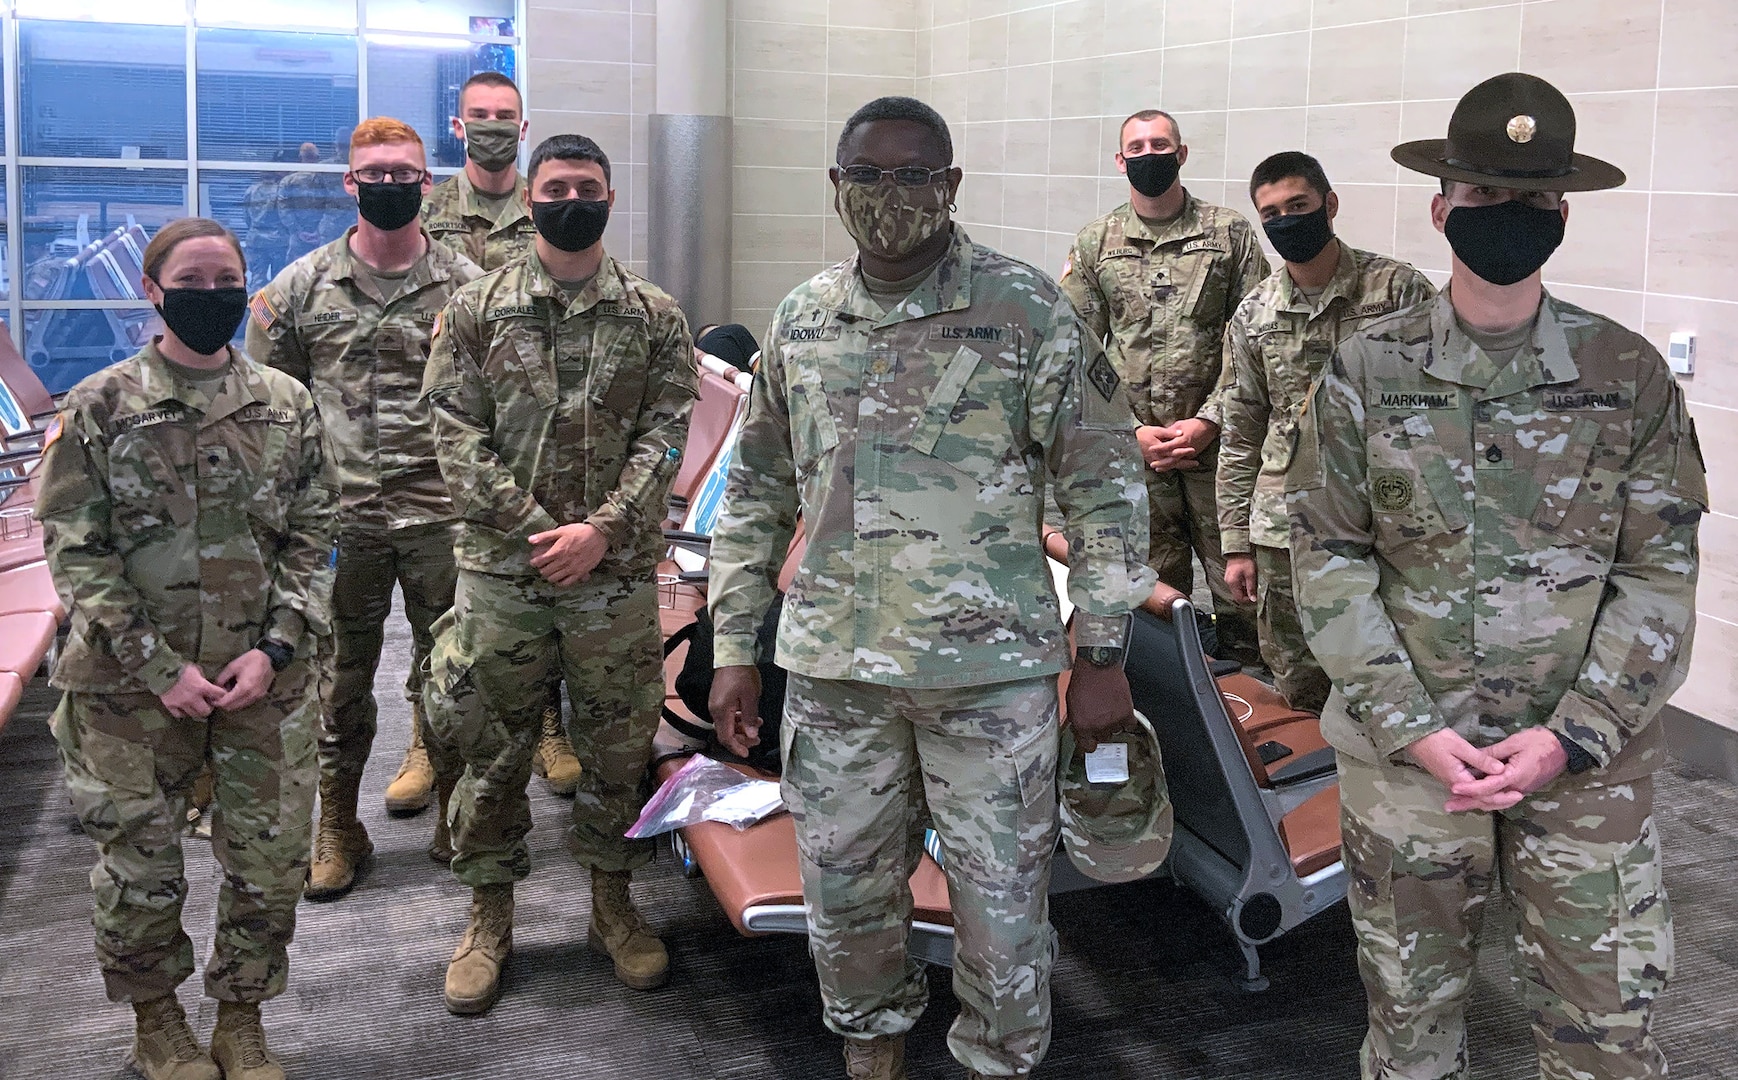 Drill Sergeant Jeffrey Markham (far right) and Chaplain (Maj.) Oyedeji Idowu (center) speak with Soldiers in training at the U.S. Army Medical Center of Excellence as they await flights from the San Antonio International Airport for Holiday Block Leave Dec. 19.